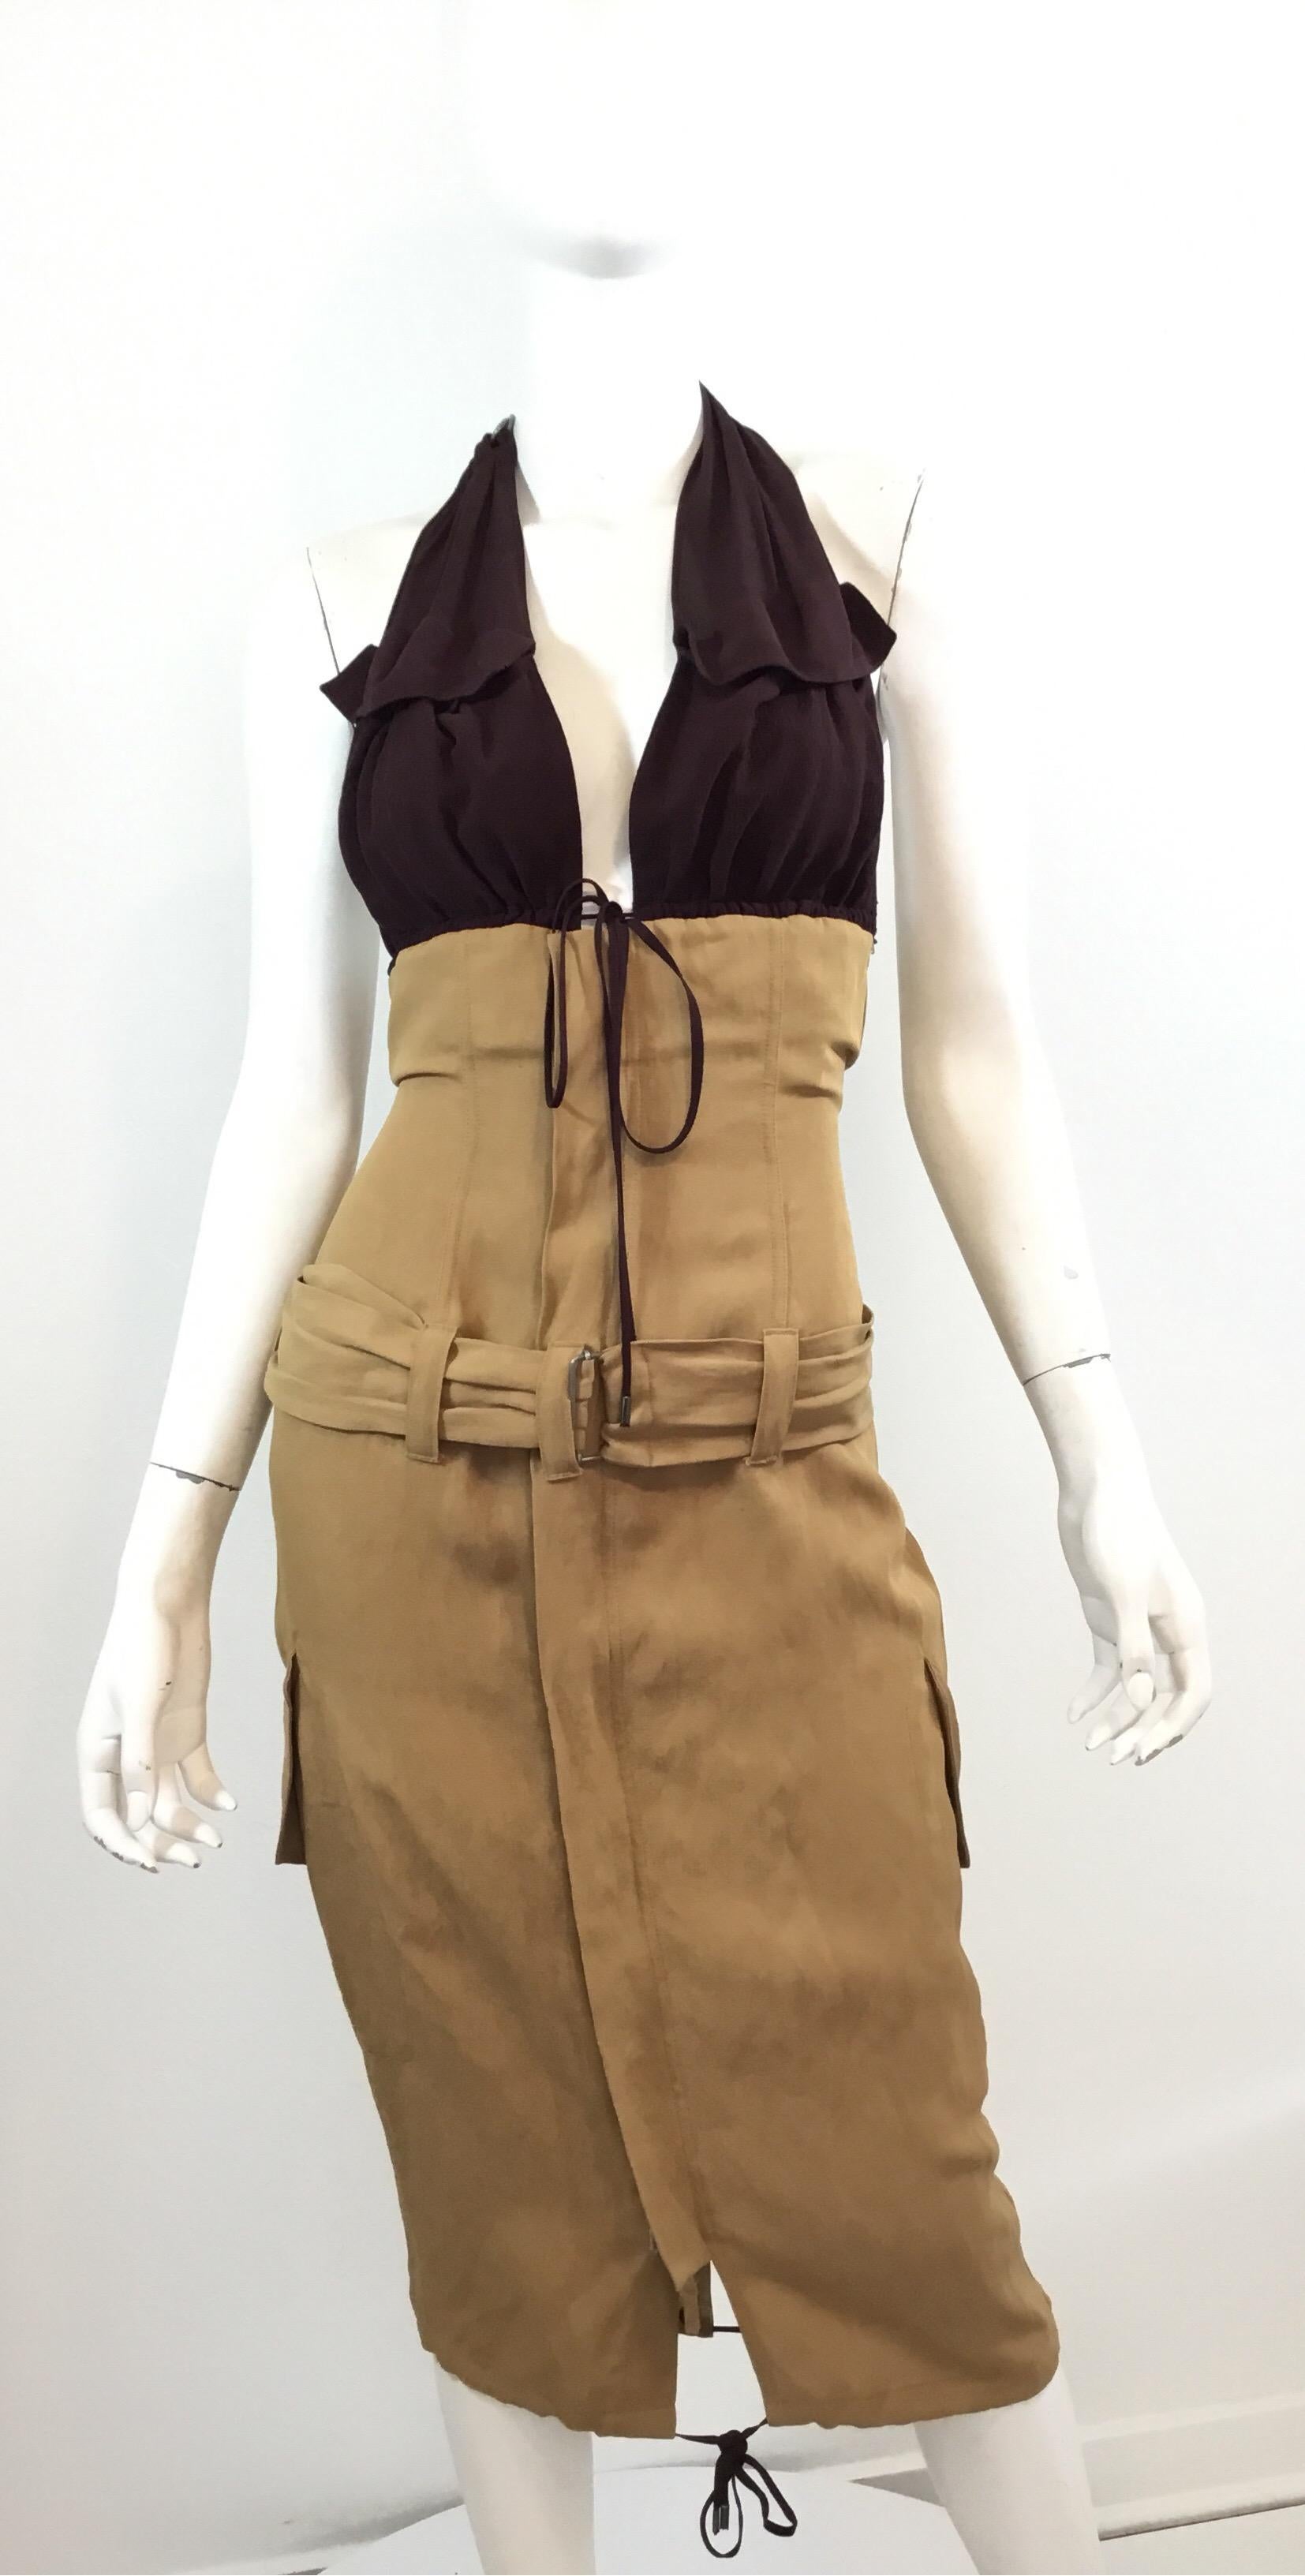 Jean Paul Gaultier dress featured in a khaki linen fabric with a burgundy silk halter top. Dress has ties at the bust and hem, belt fastening over a concealed zipper and snap button fastening, and flap pockets at the waist. Dress is labeled a size